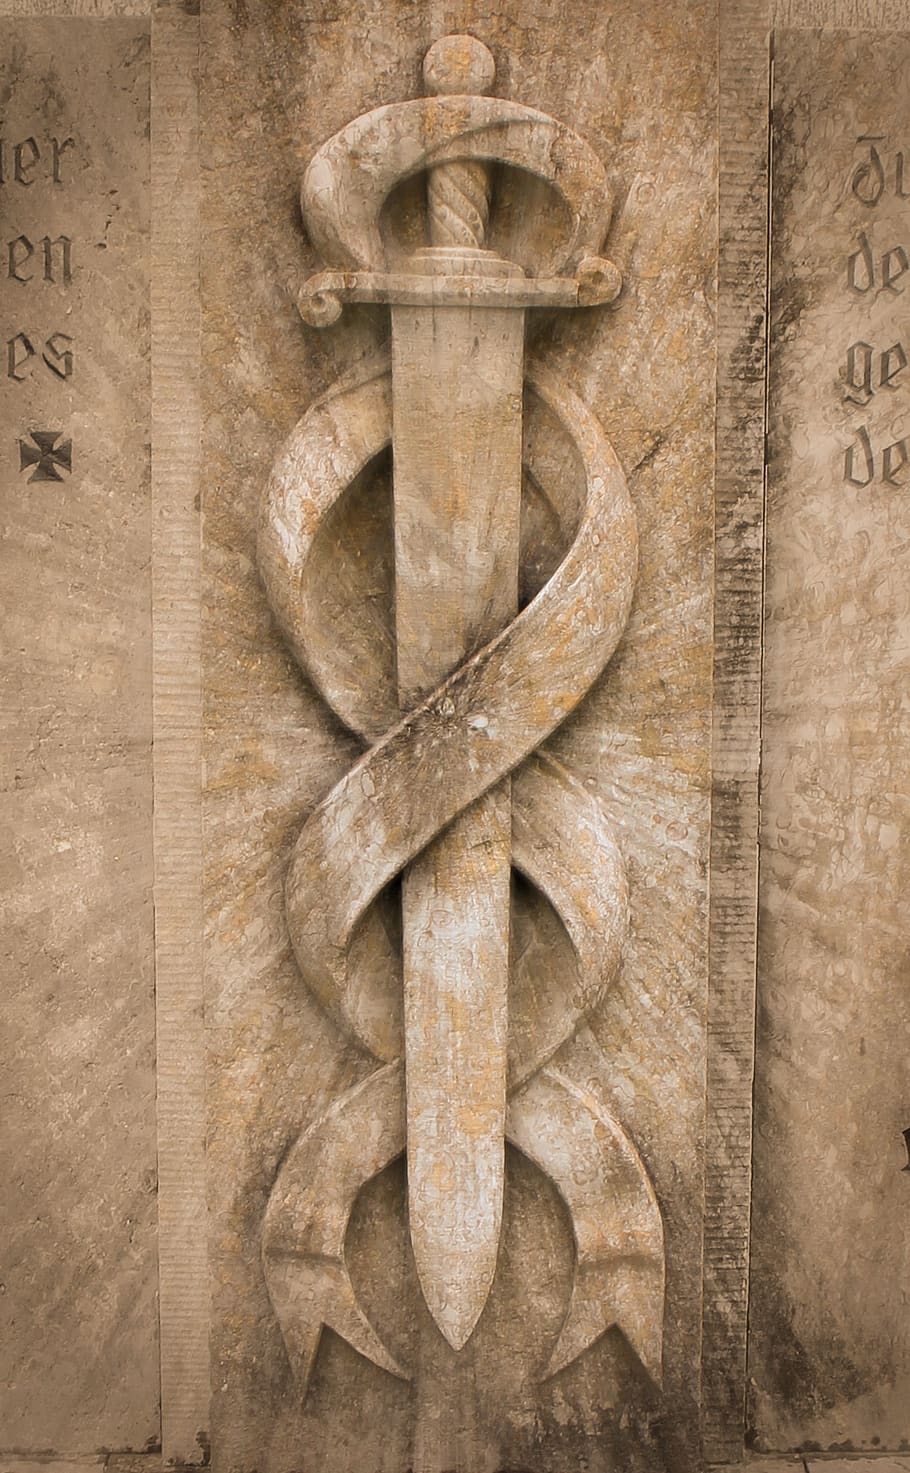 relief, sword, stone, symbol, weapon, historically, past, close-up, wood - material, studio shot